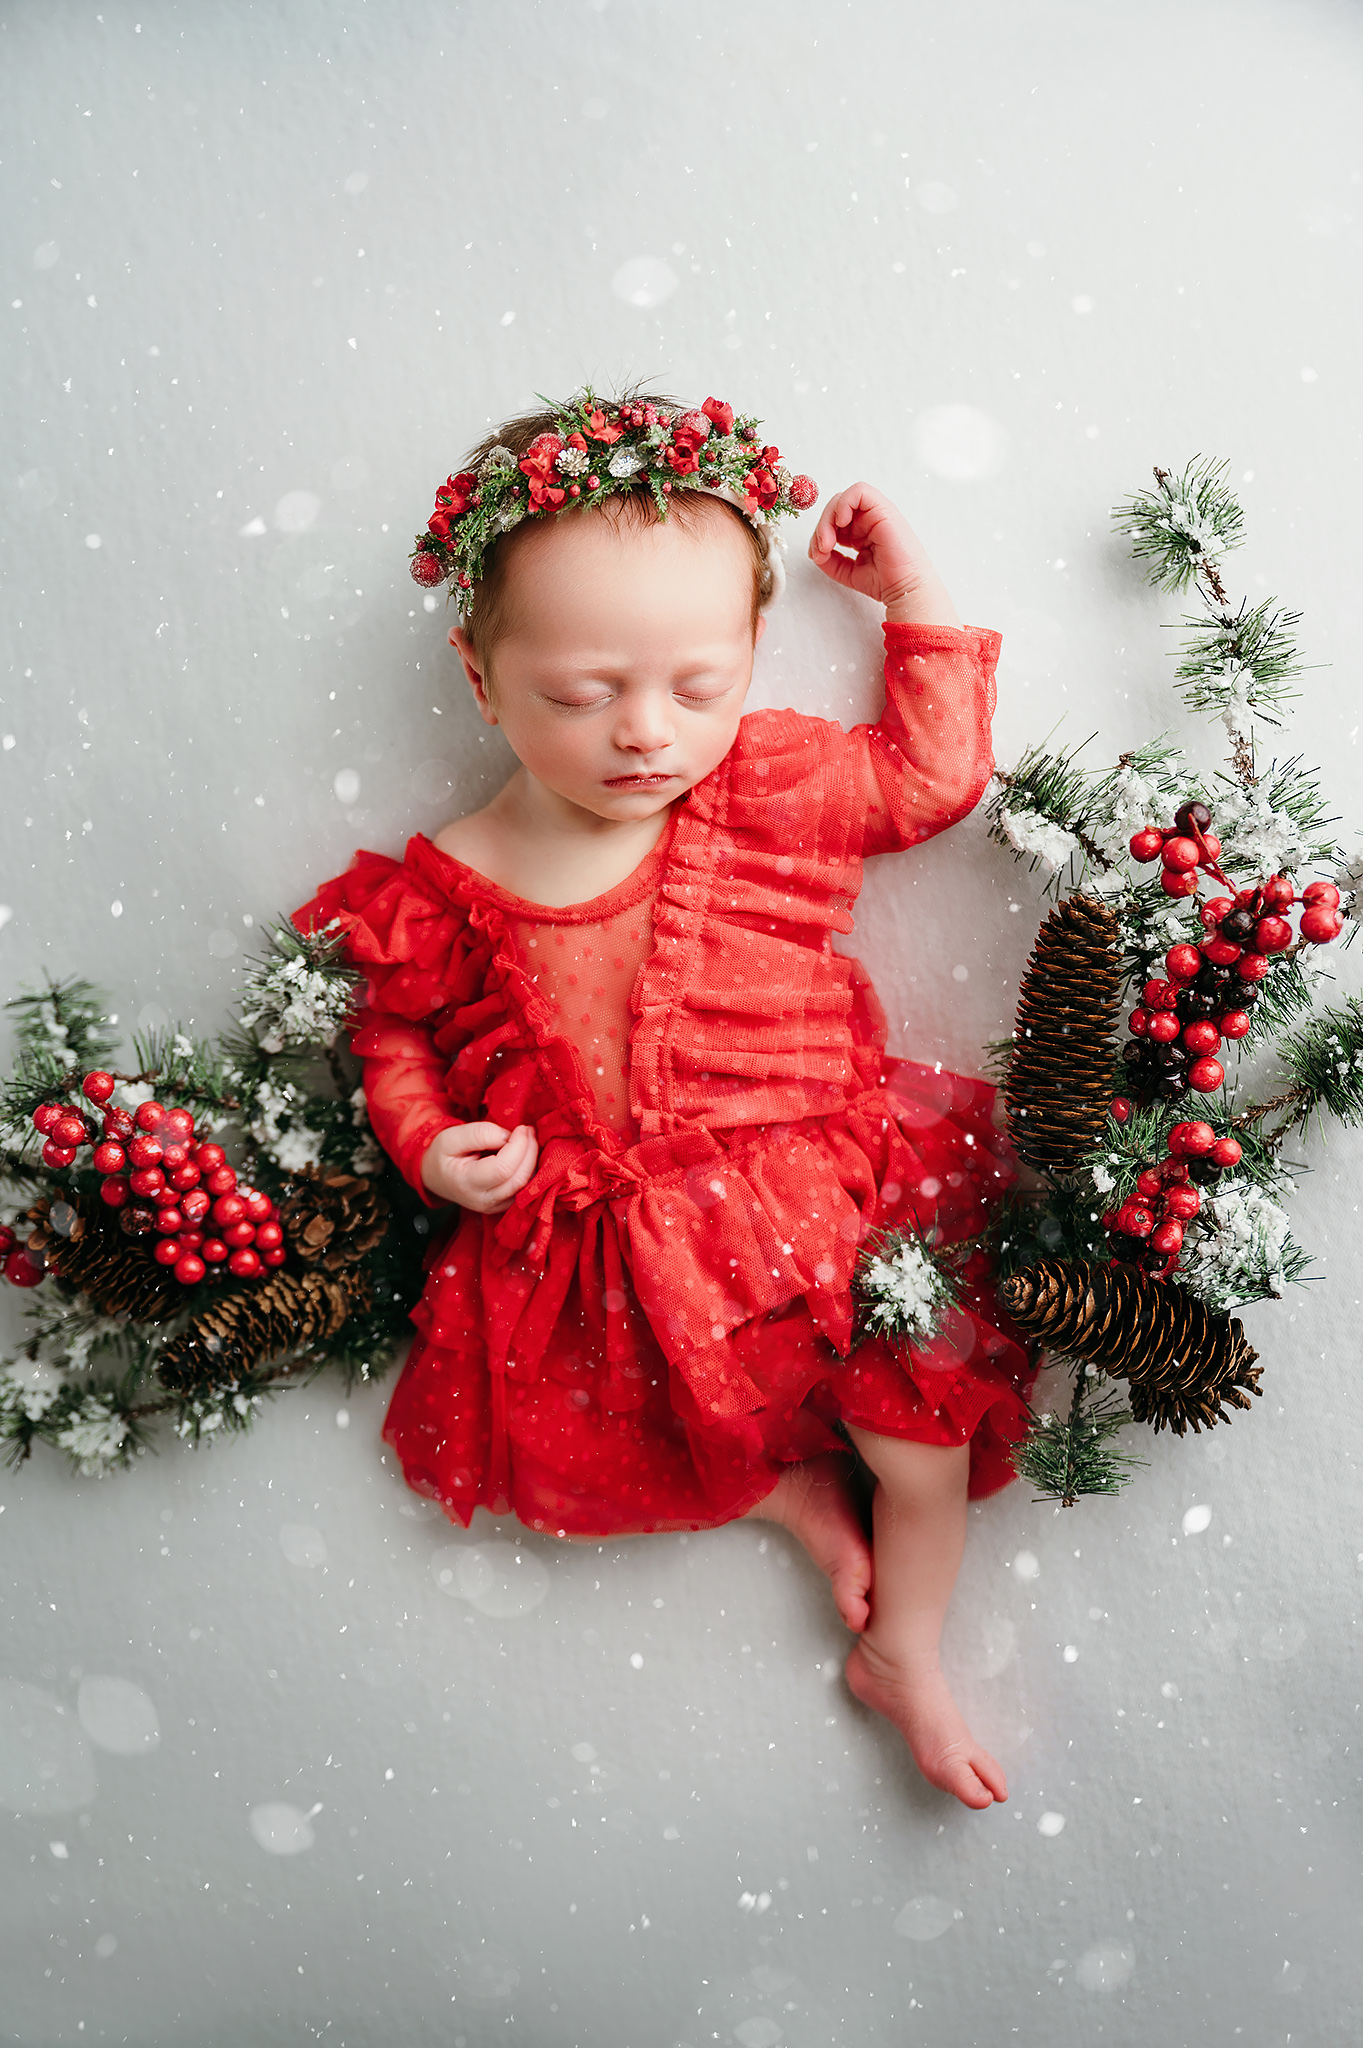 Christmas baby photoshoot with red dress